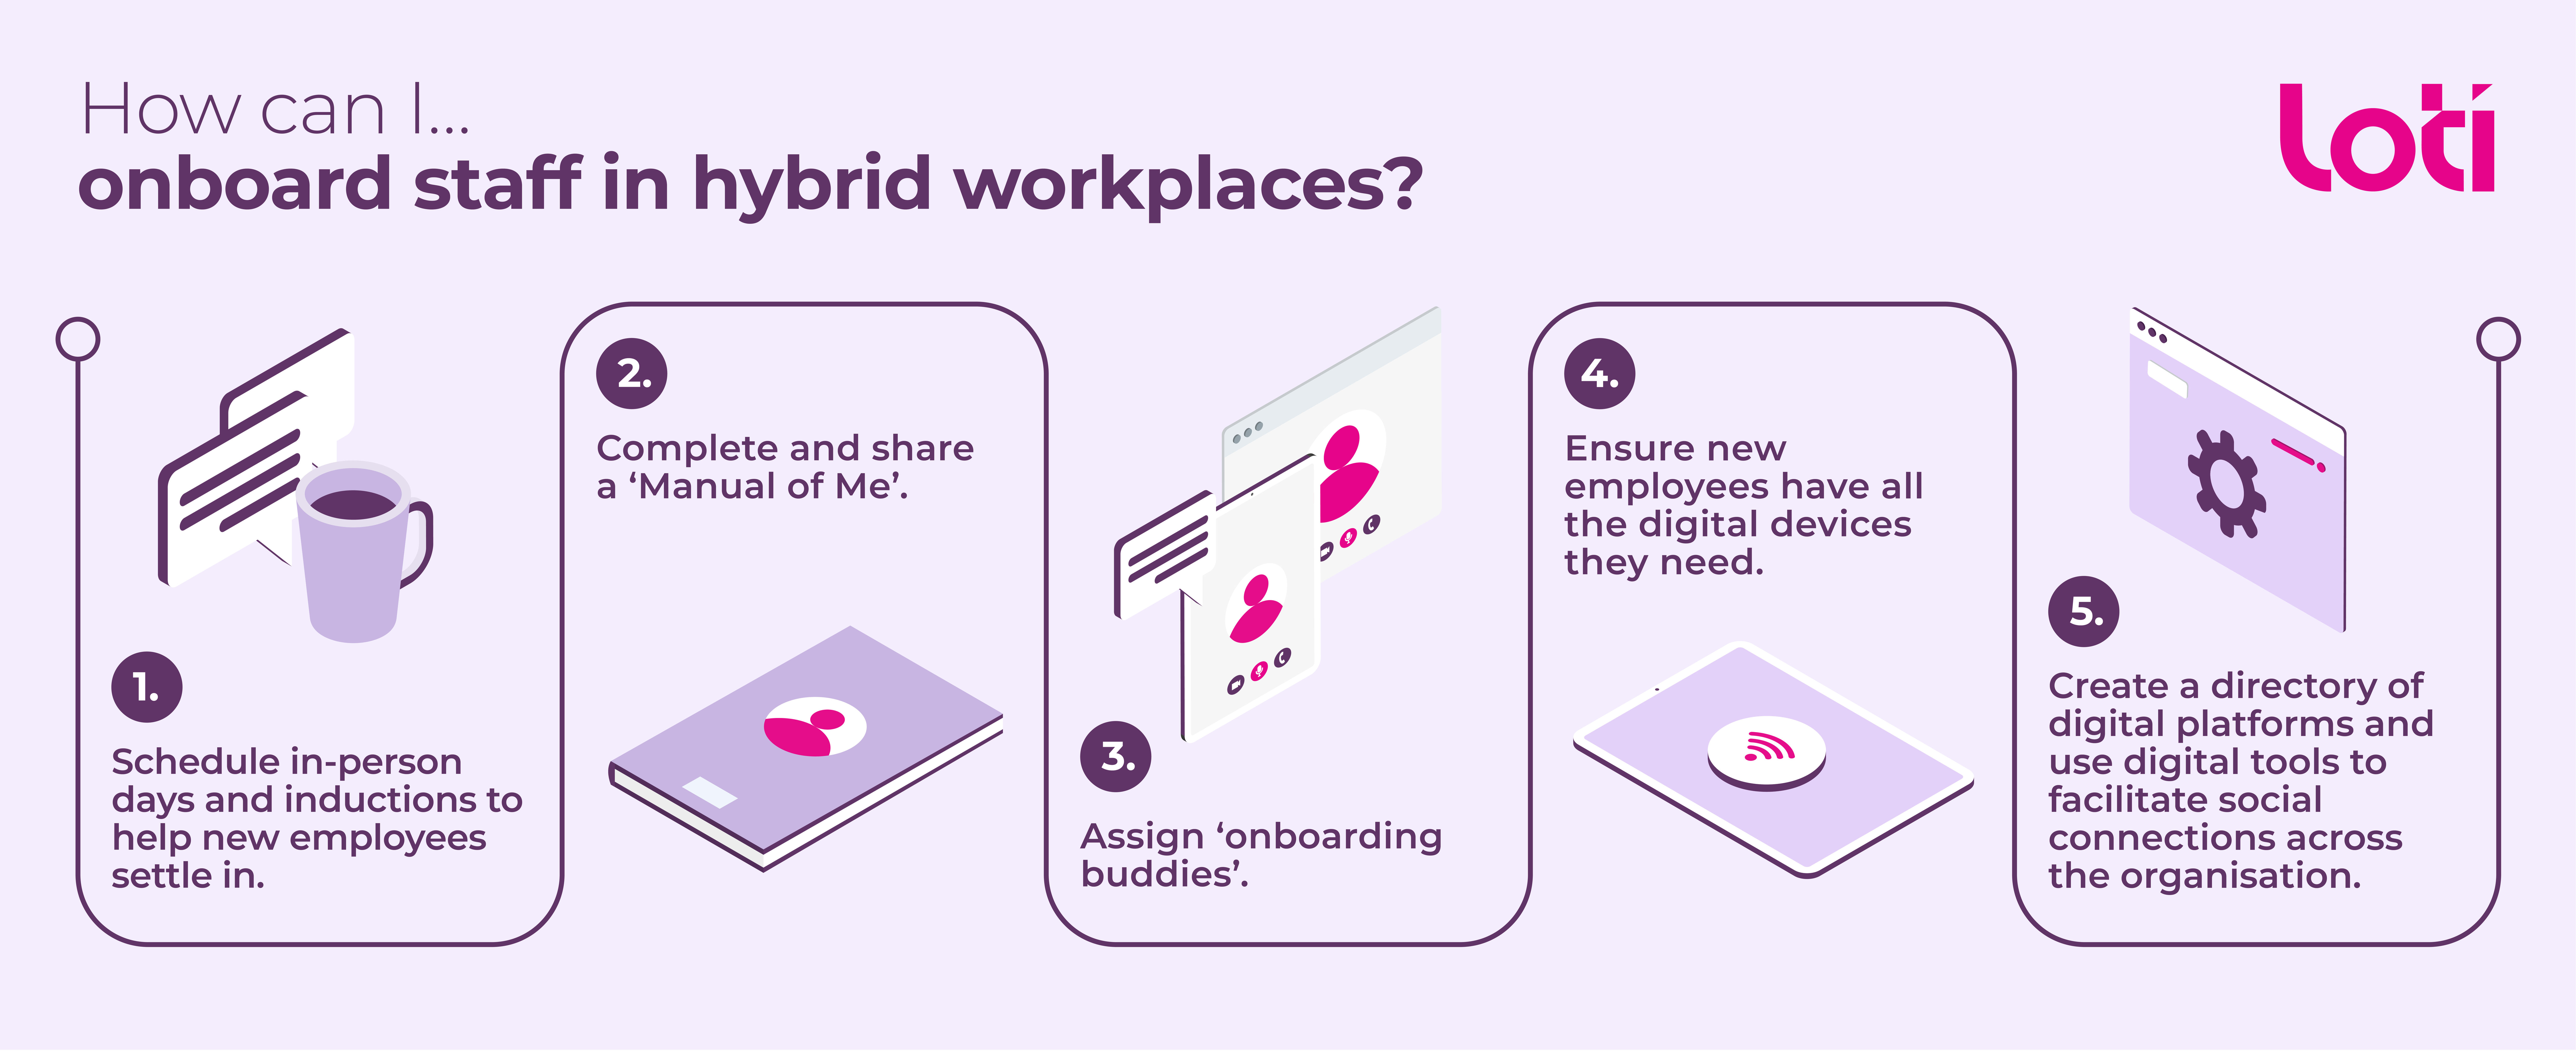 An infographic illustrating How can I… onboard staff in hybrid workplaces? Schedule in-person days and inductions to help new employees settle in. Complete and share a ‘Manual of Me’. Assign ‘onboarding buddies’. Ensure new employees have all the digital devices they need. Create a directory of digital platforms and use digital tools to facilitate social connections across the organisation.